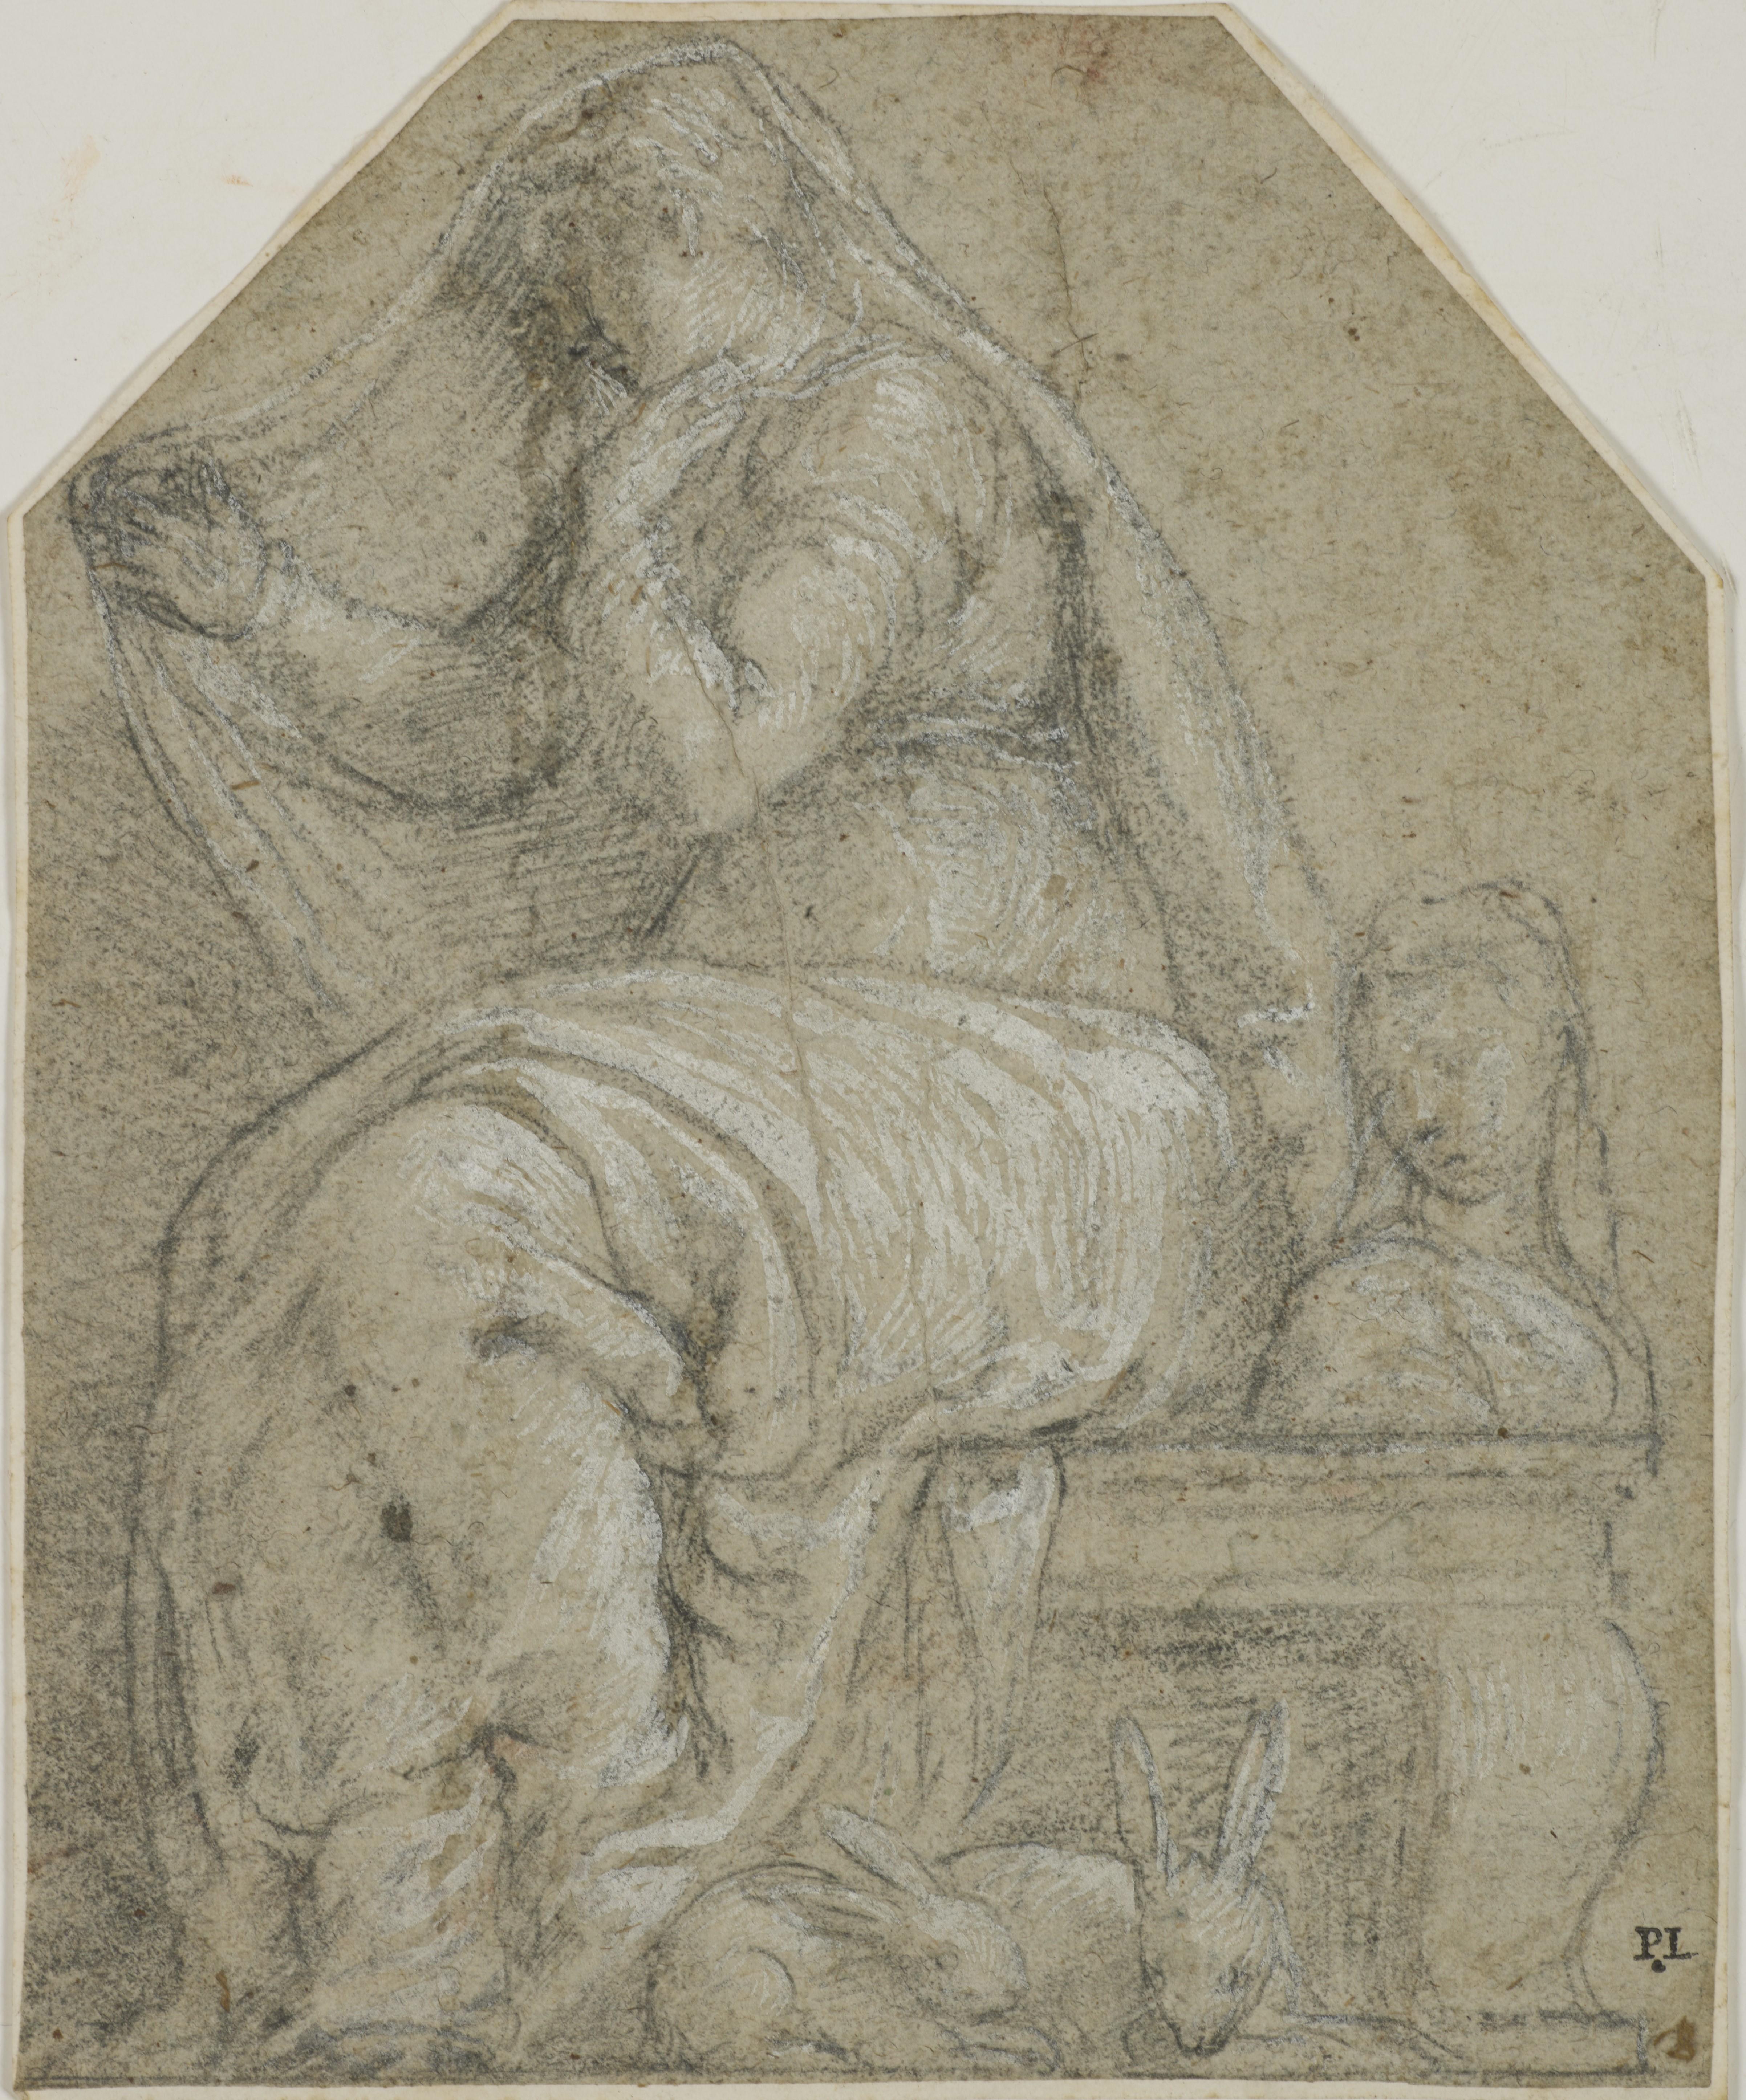 Allegory of Chastity, a drawing attributed to G. Porta with great provenance  - Art by Giuseppe Porta called Salviati